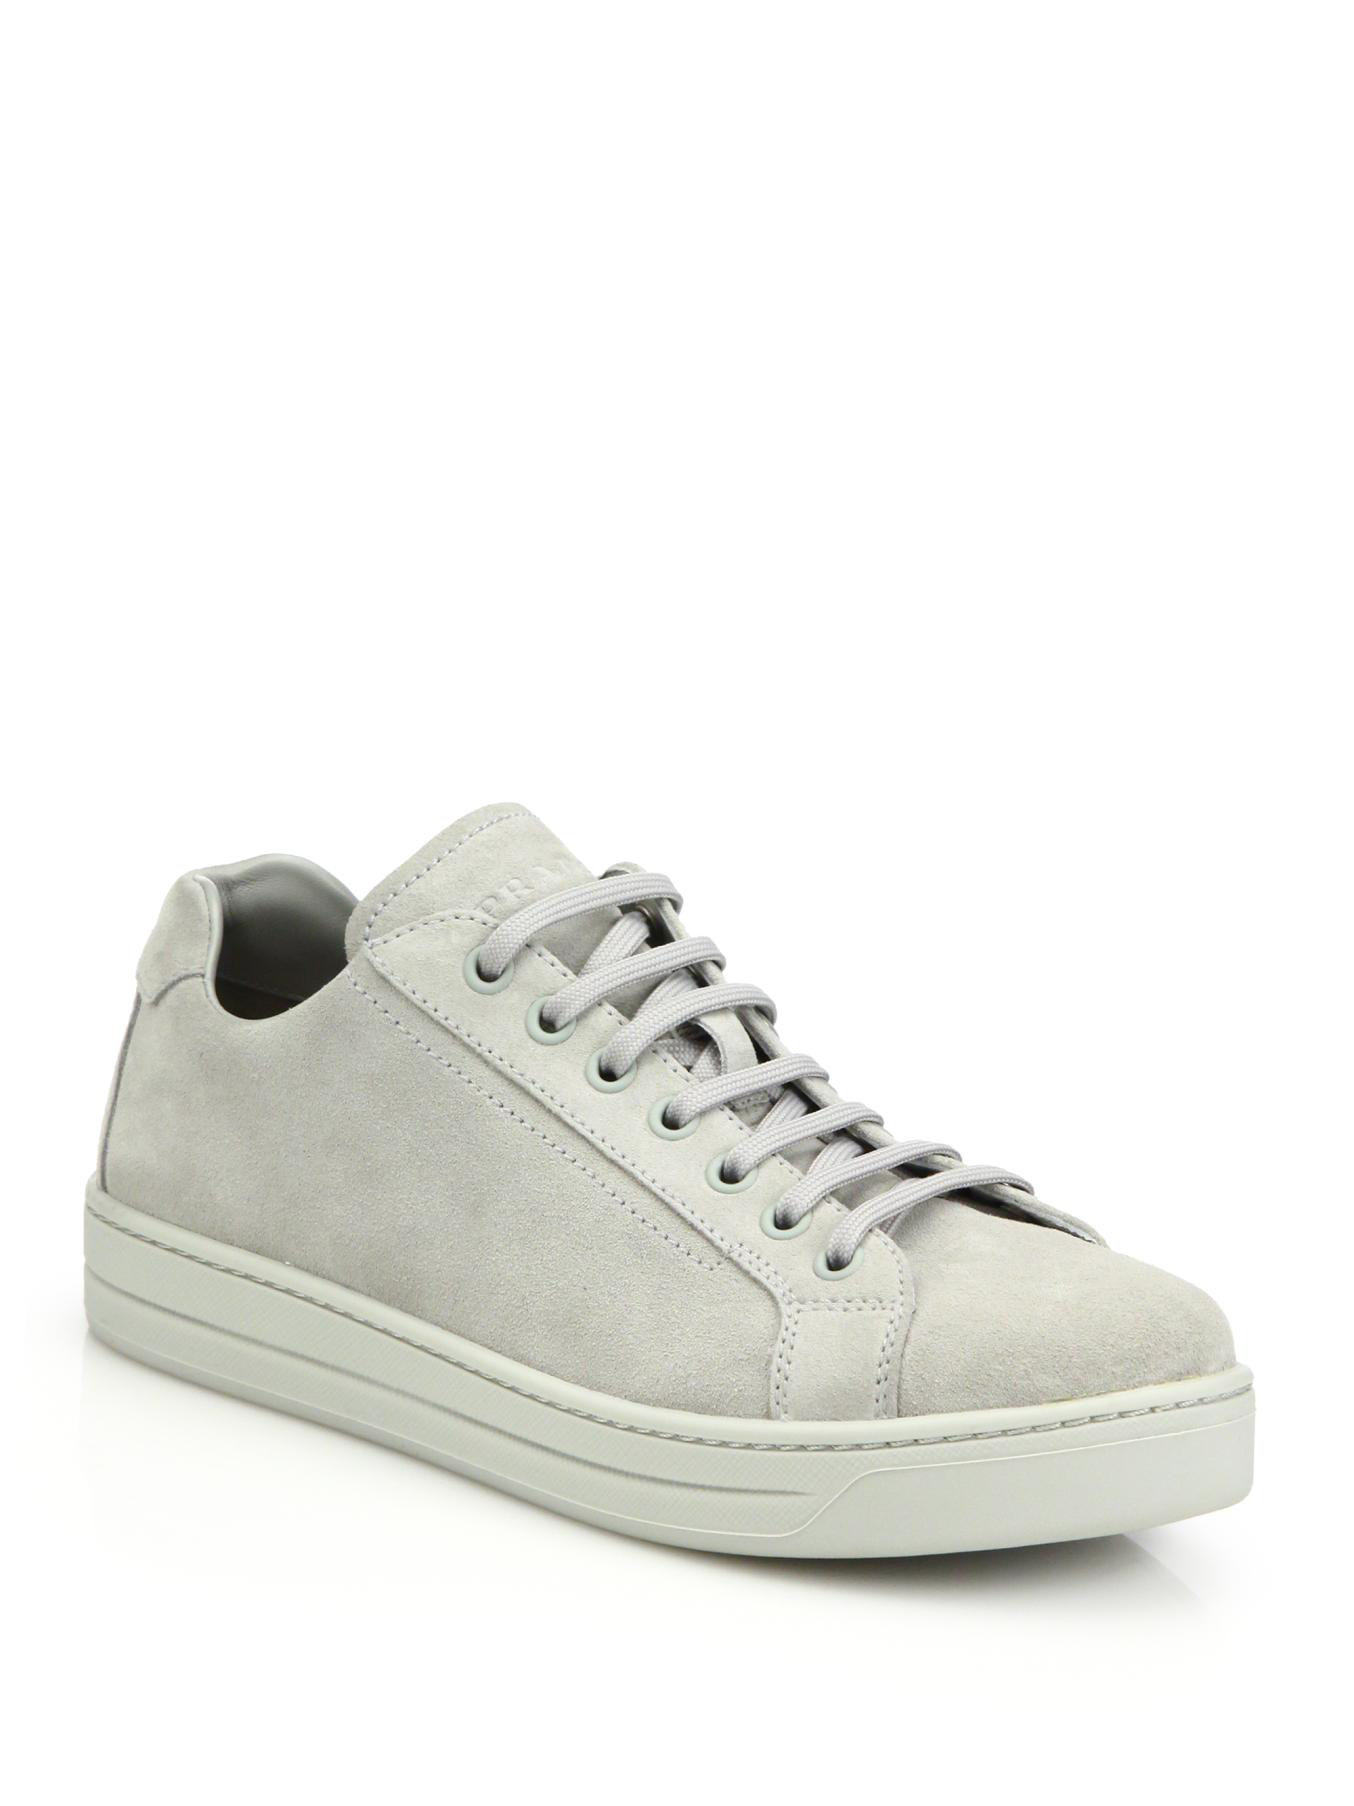 Lyst - Prada Suede Lace-up Sneakers in Gray